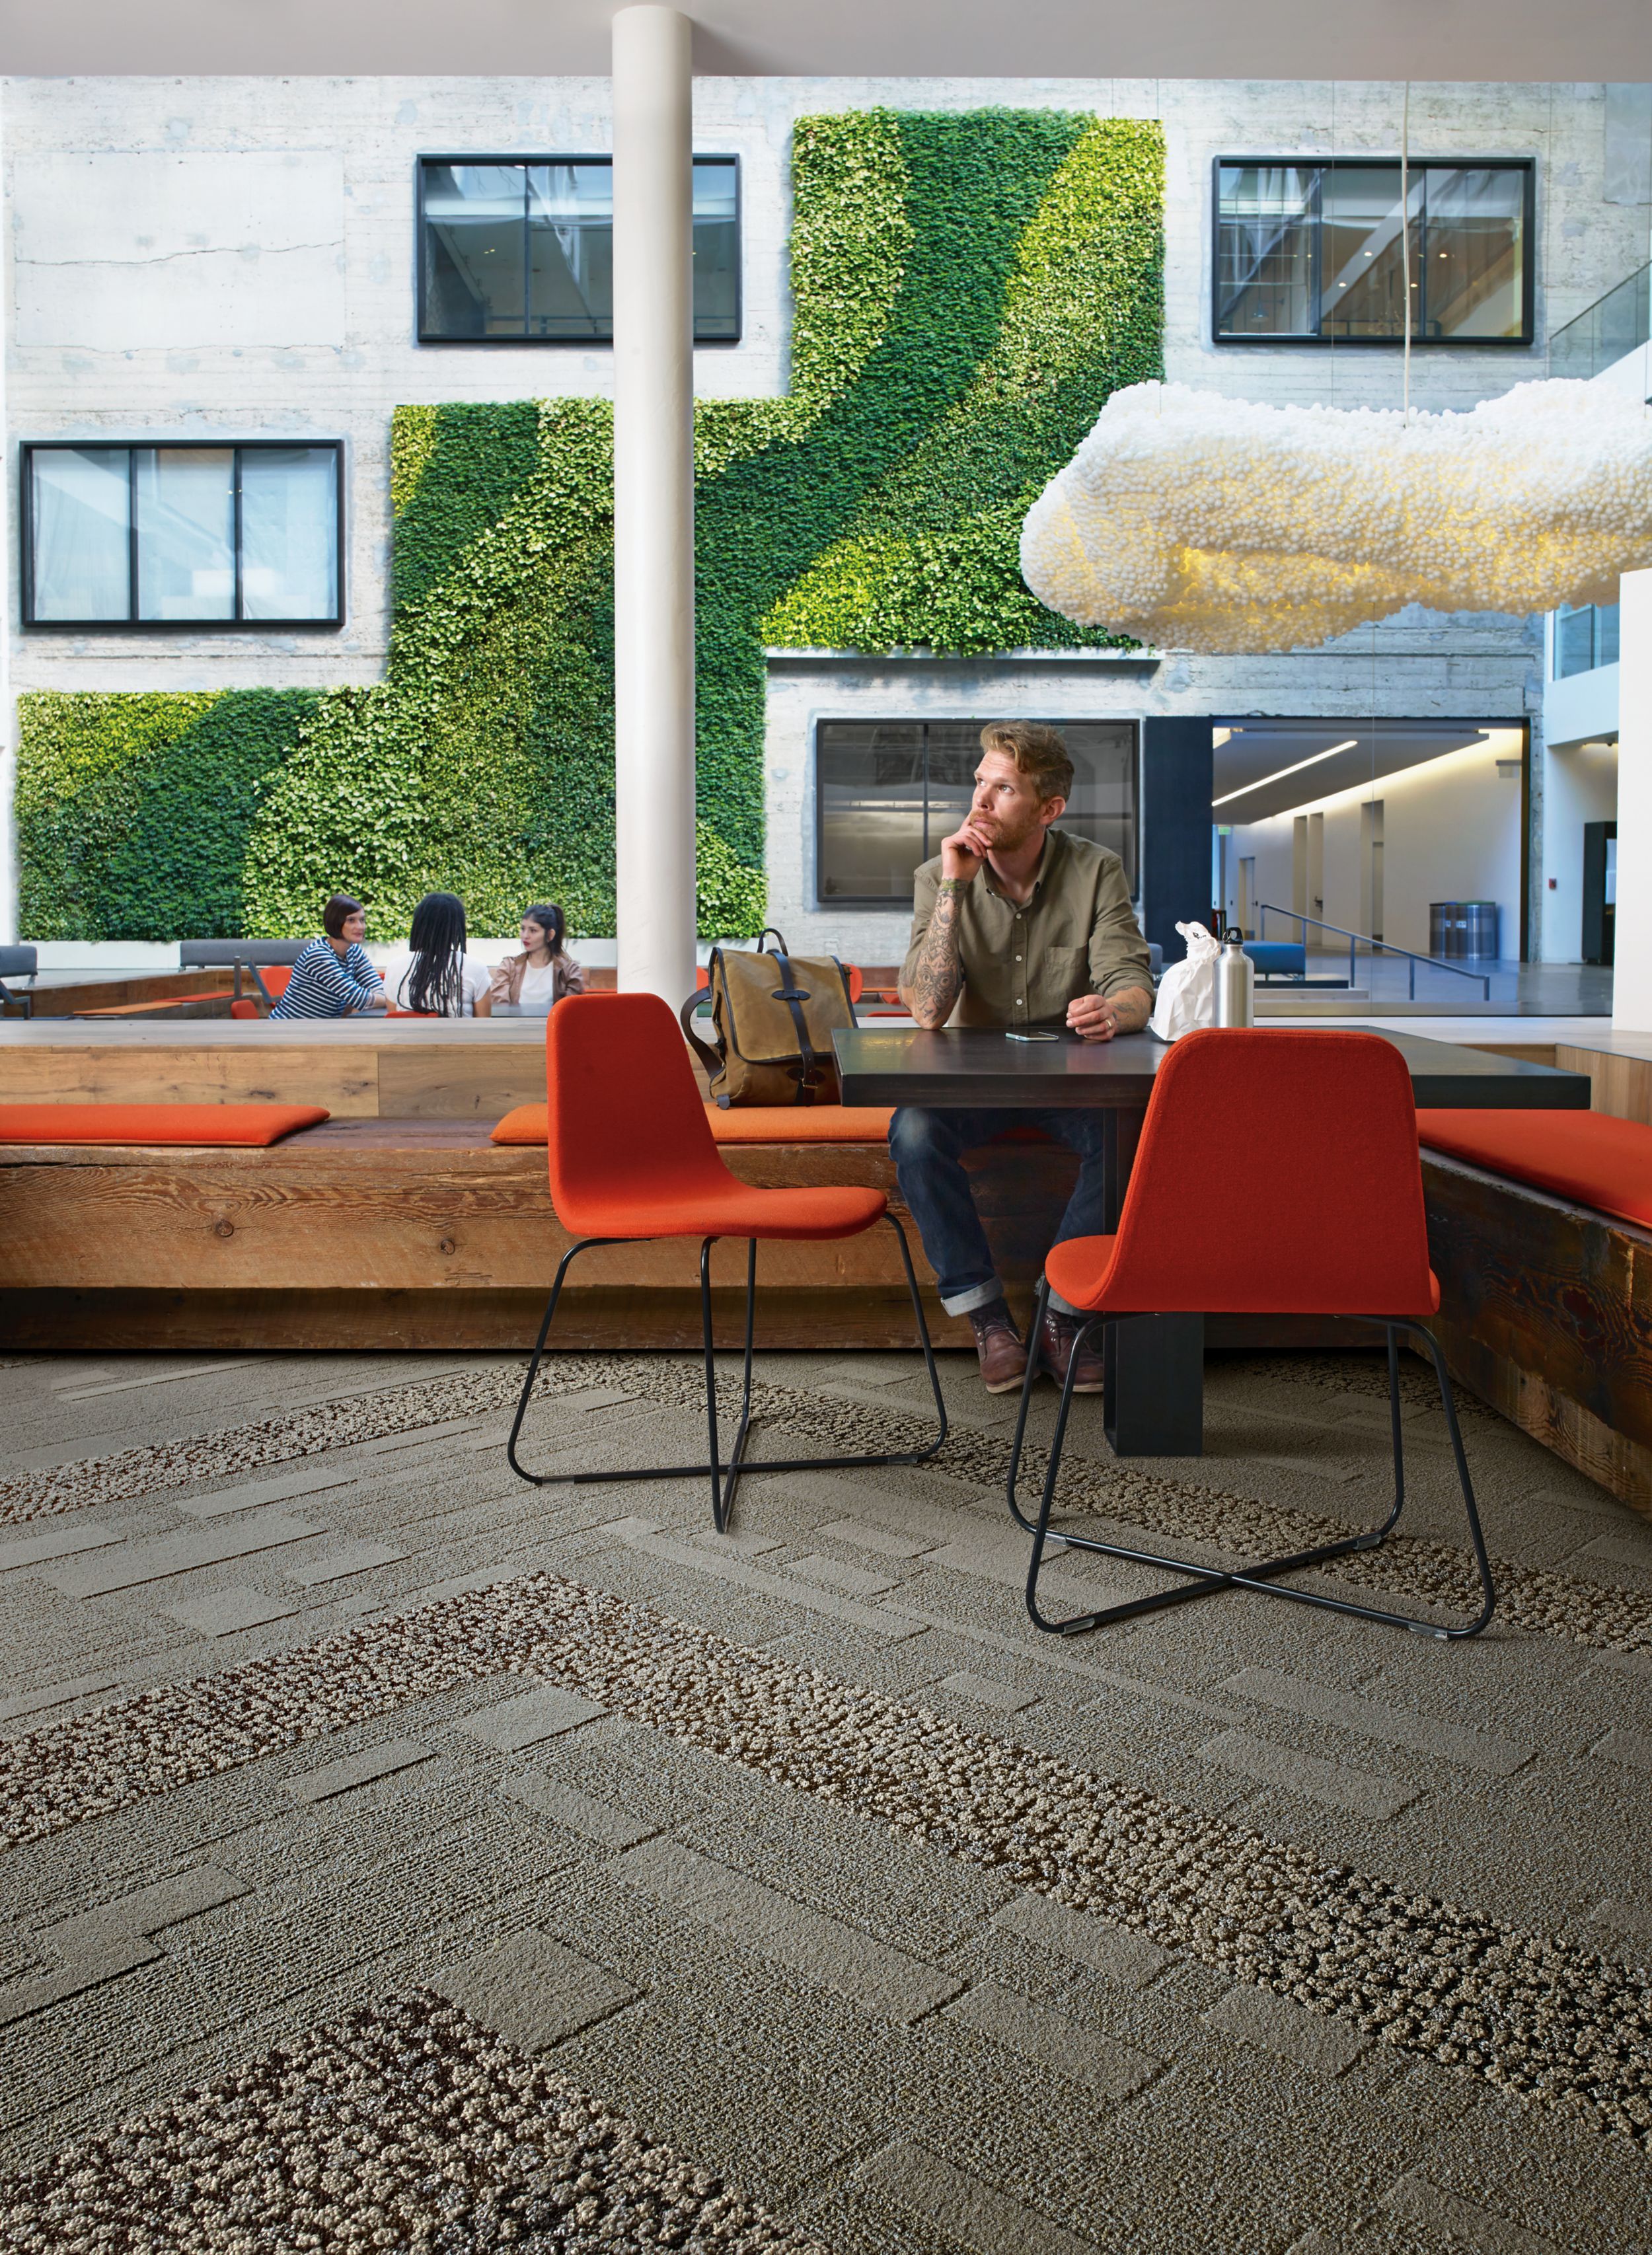 Interface EM552 plank carpet tile with man sitting at table with lunch and group meeting in front of vine wall in the background  número de imagen 7